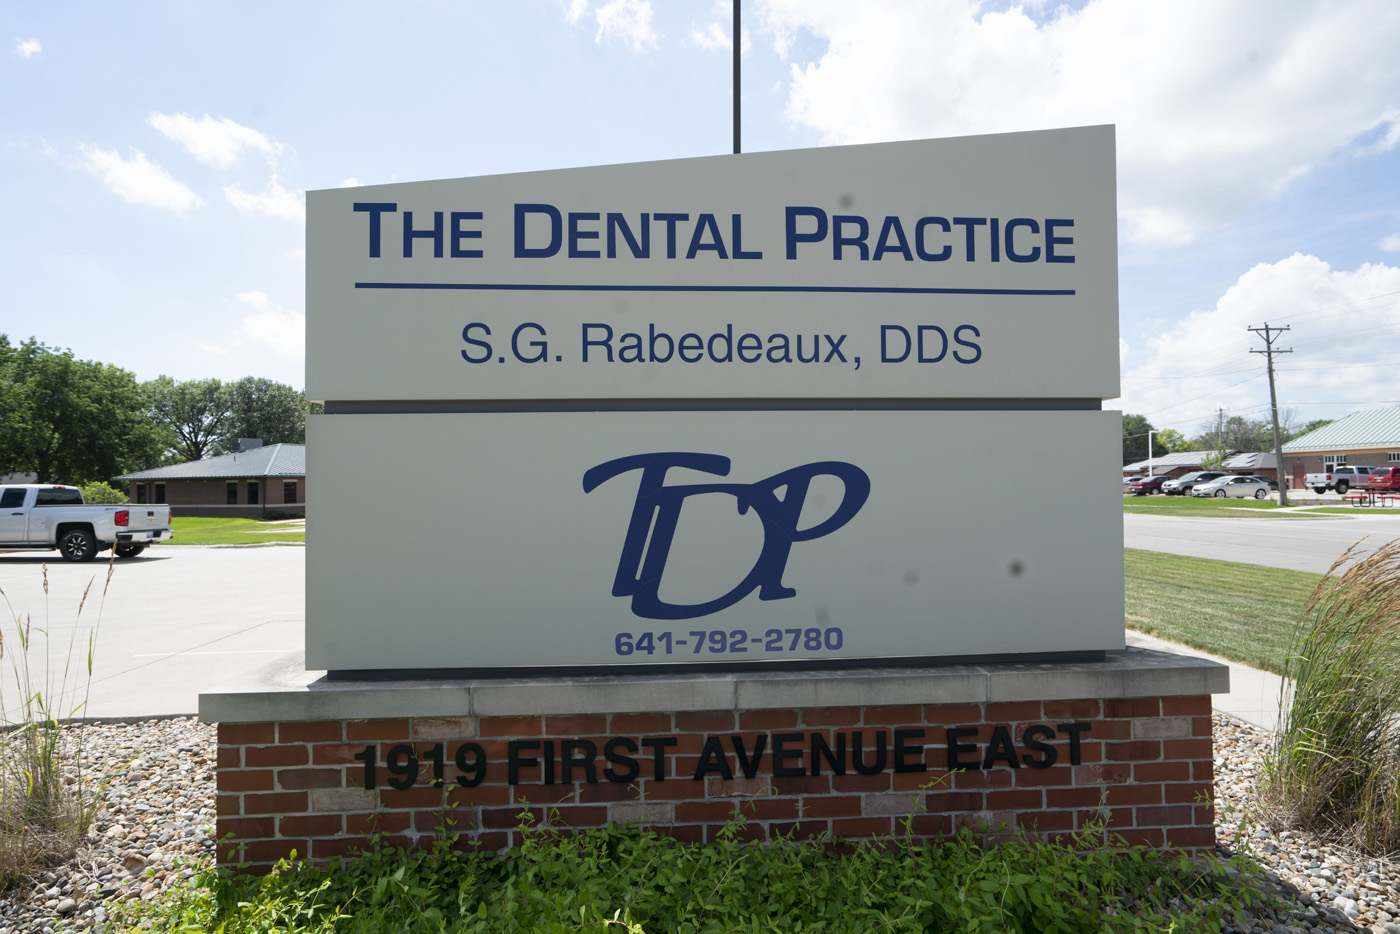 Dental Services in Newton, IA at The Dental Practice